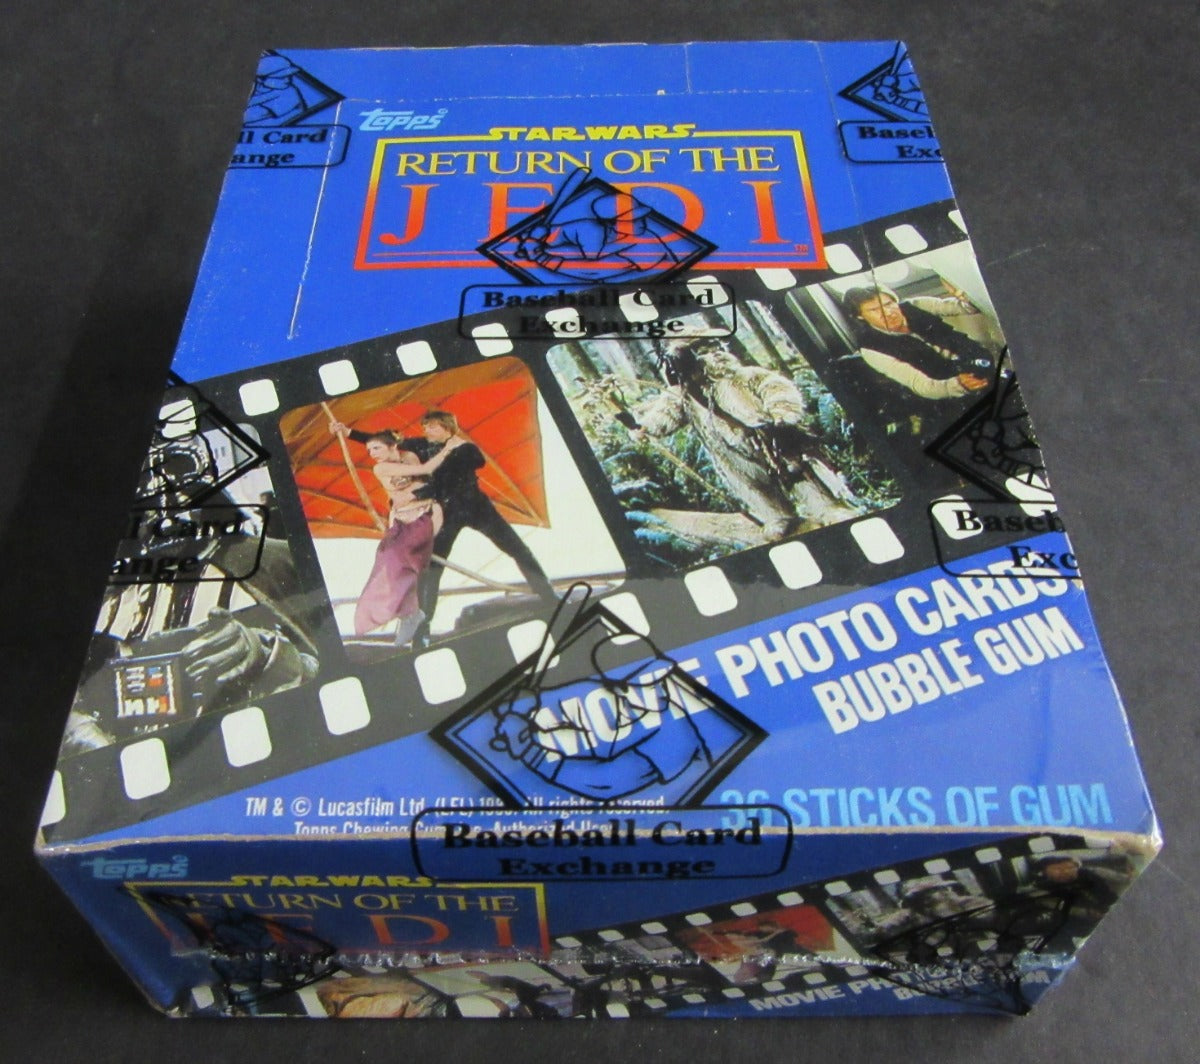 1983 Topps Return Of The Jedi Unopened Series 1 Wax Box (Authenticate)